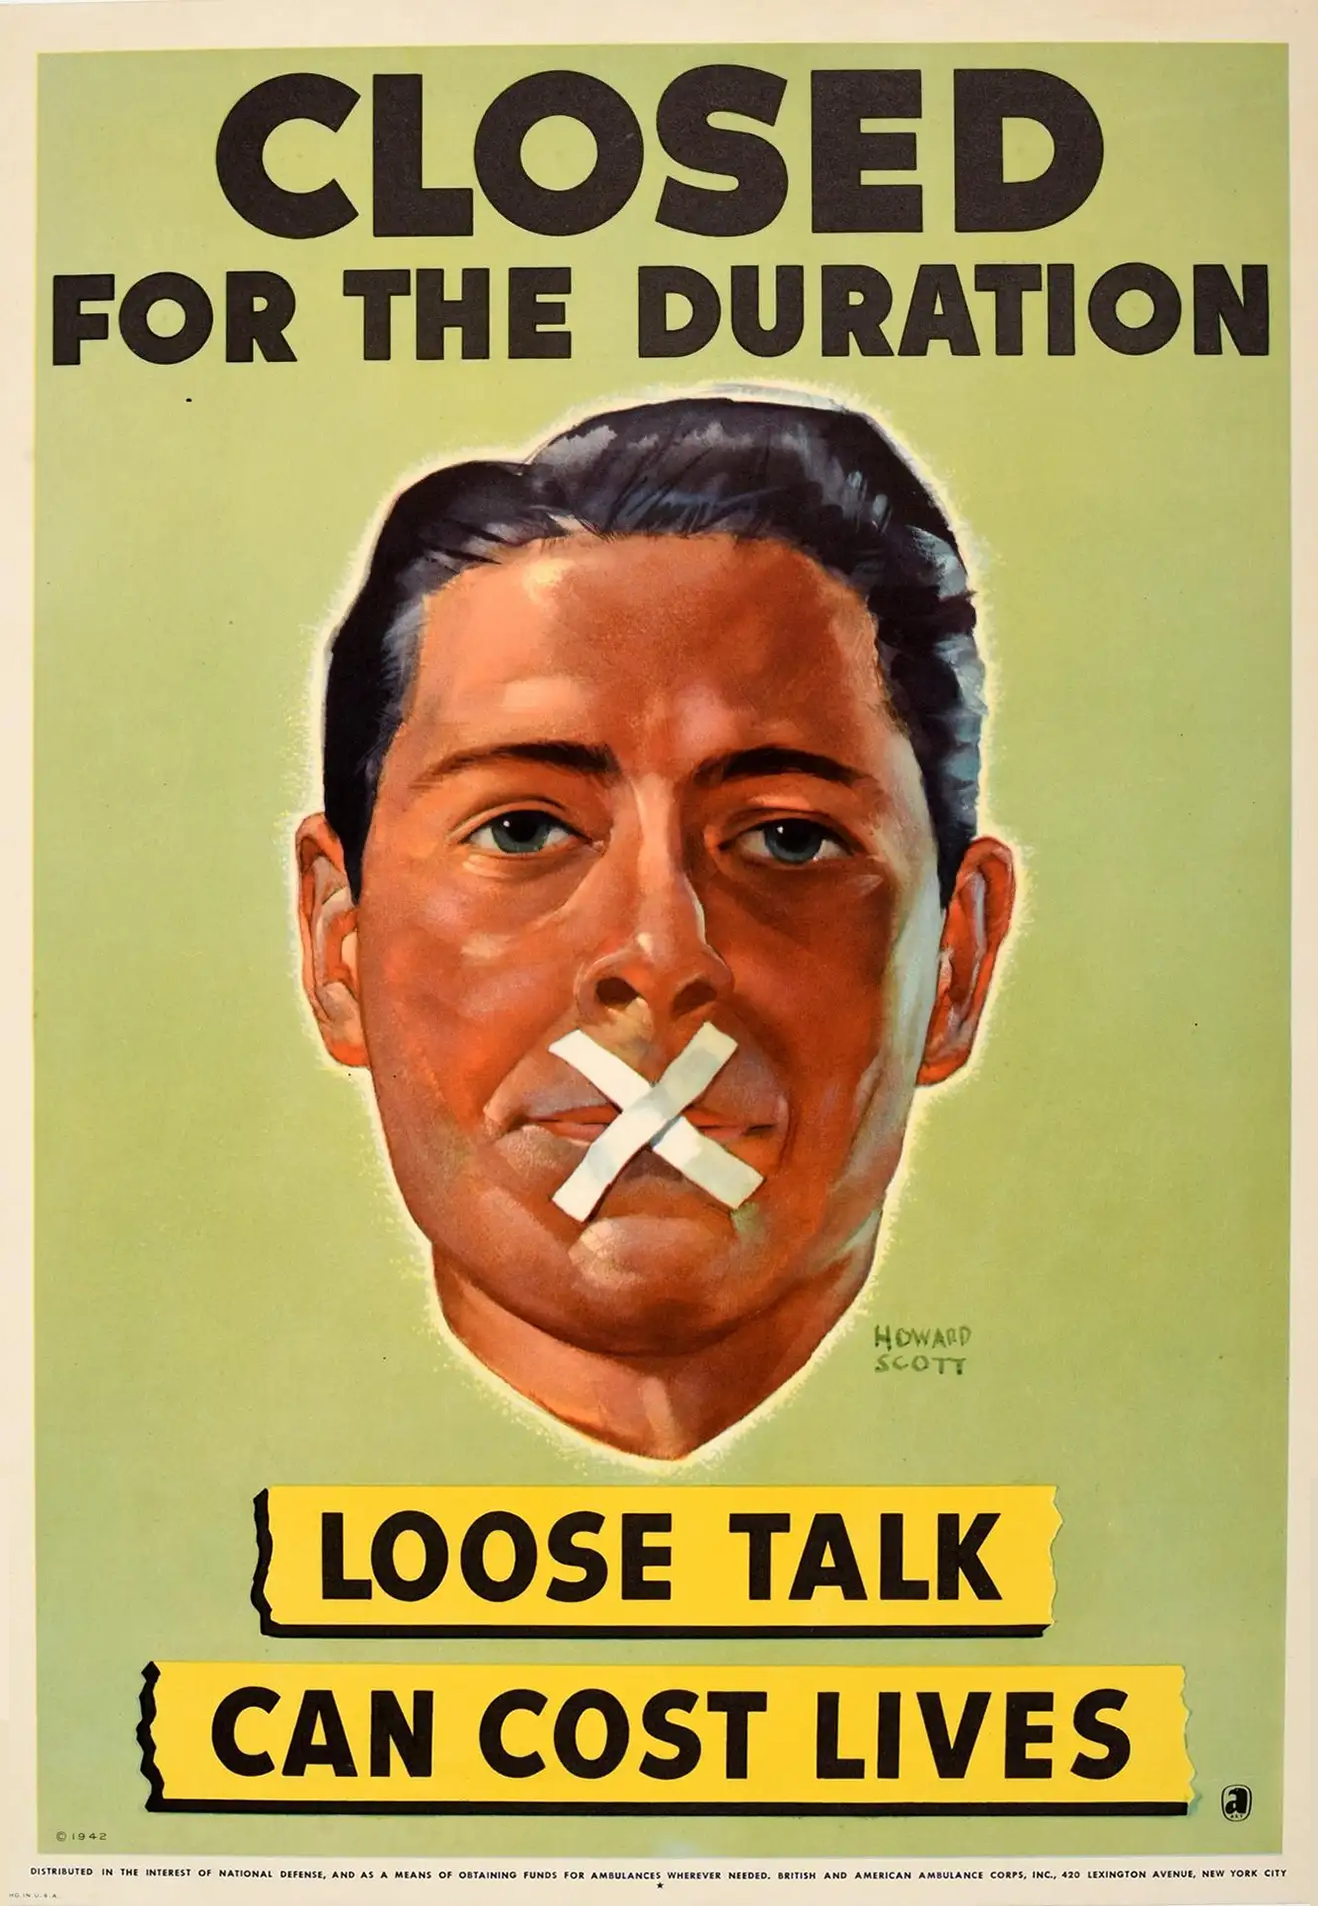 A poster of a middle aged man looking straight at us with tape criss-crossed over his mouth against an olive green background.